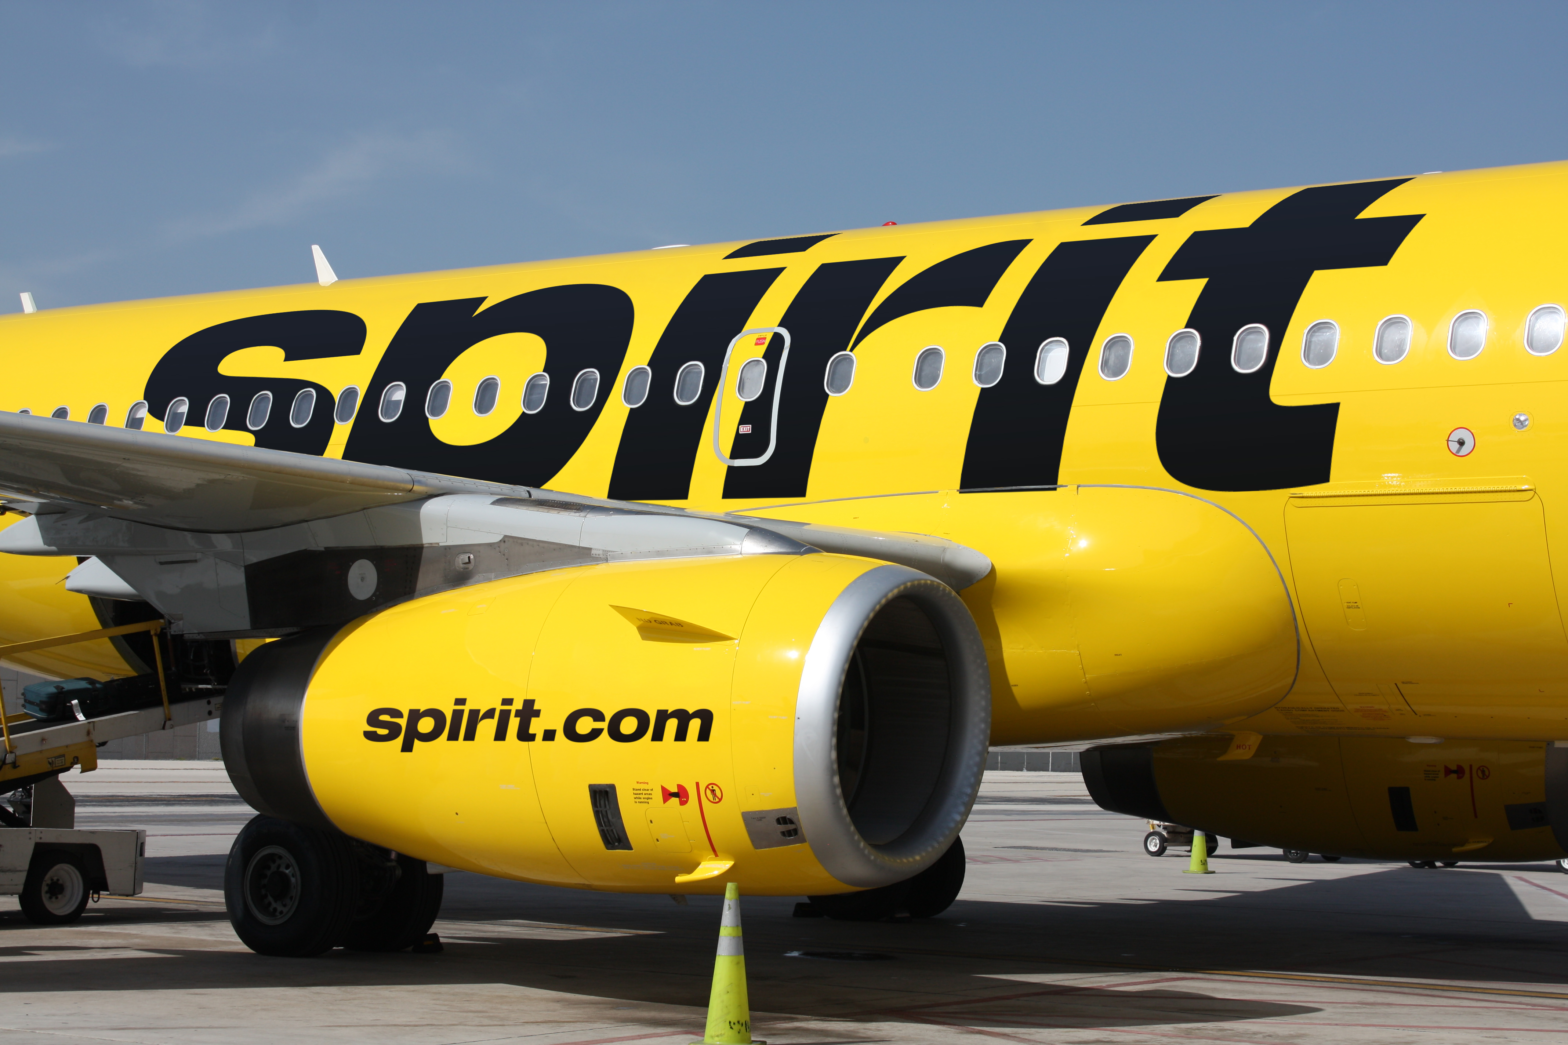 African-American Flight Attendant Says Spirit Airlines Racially Discriminated And Fired Her For Being Overweight, Now Sues Airline